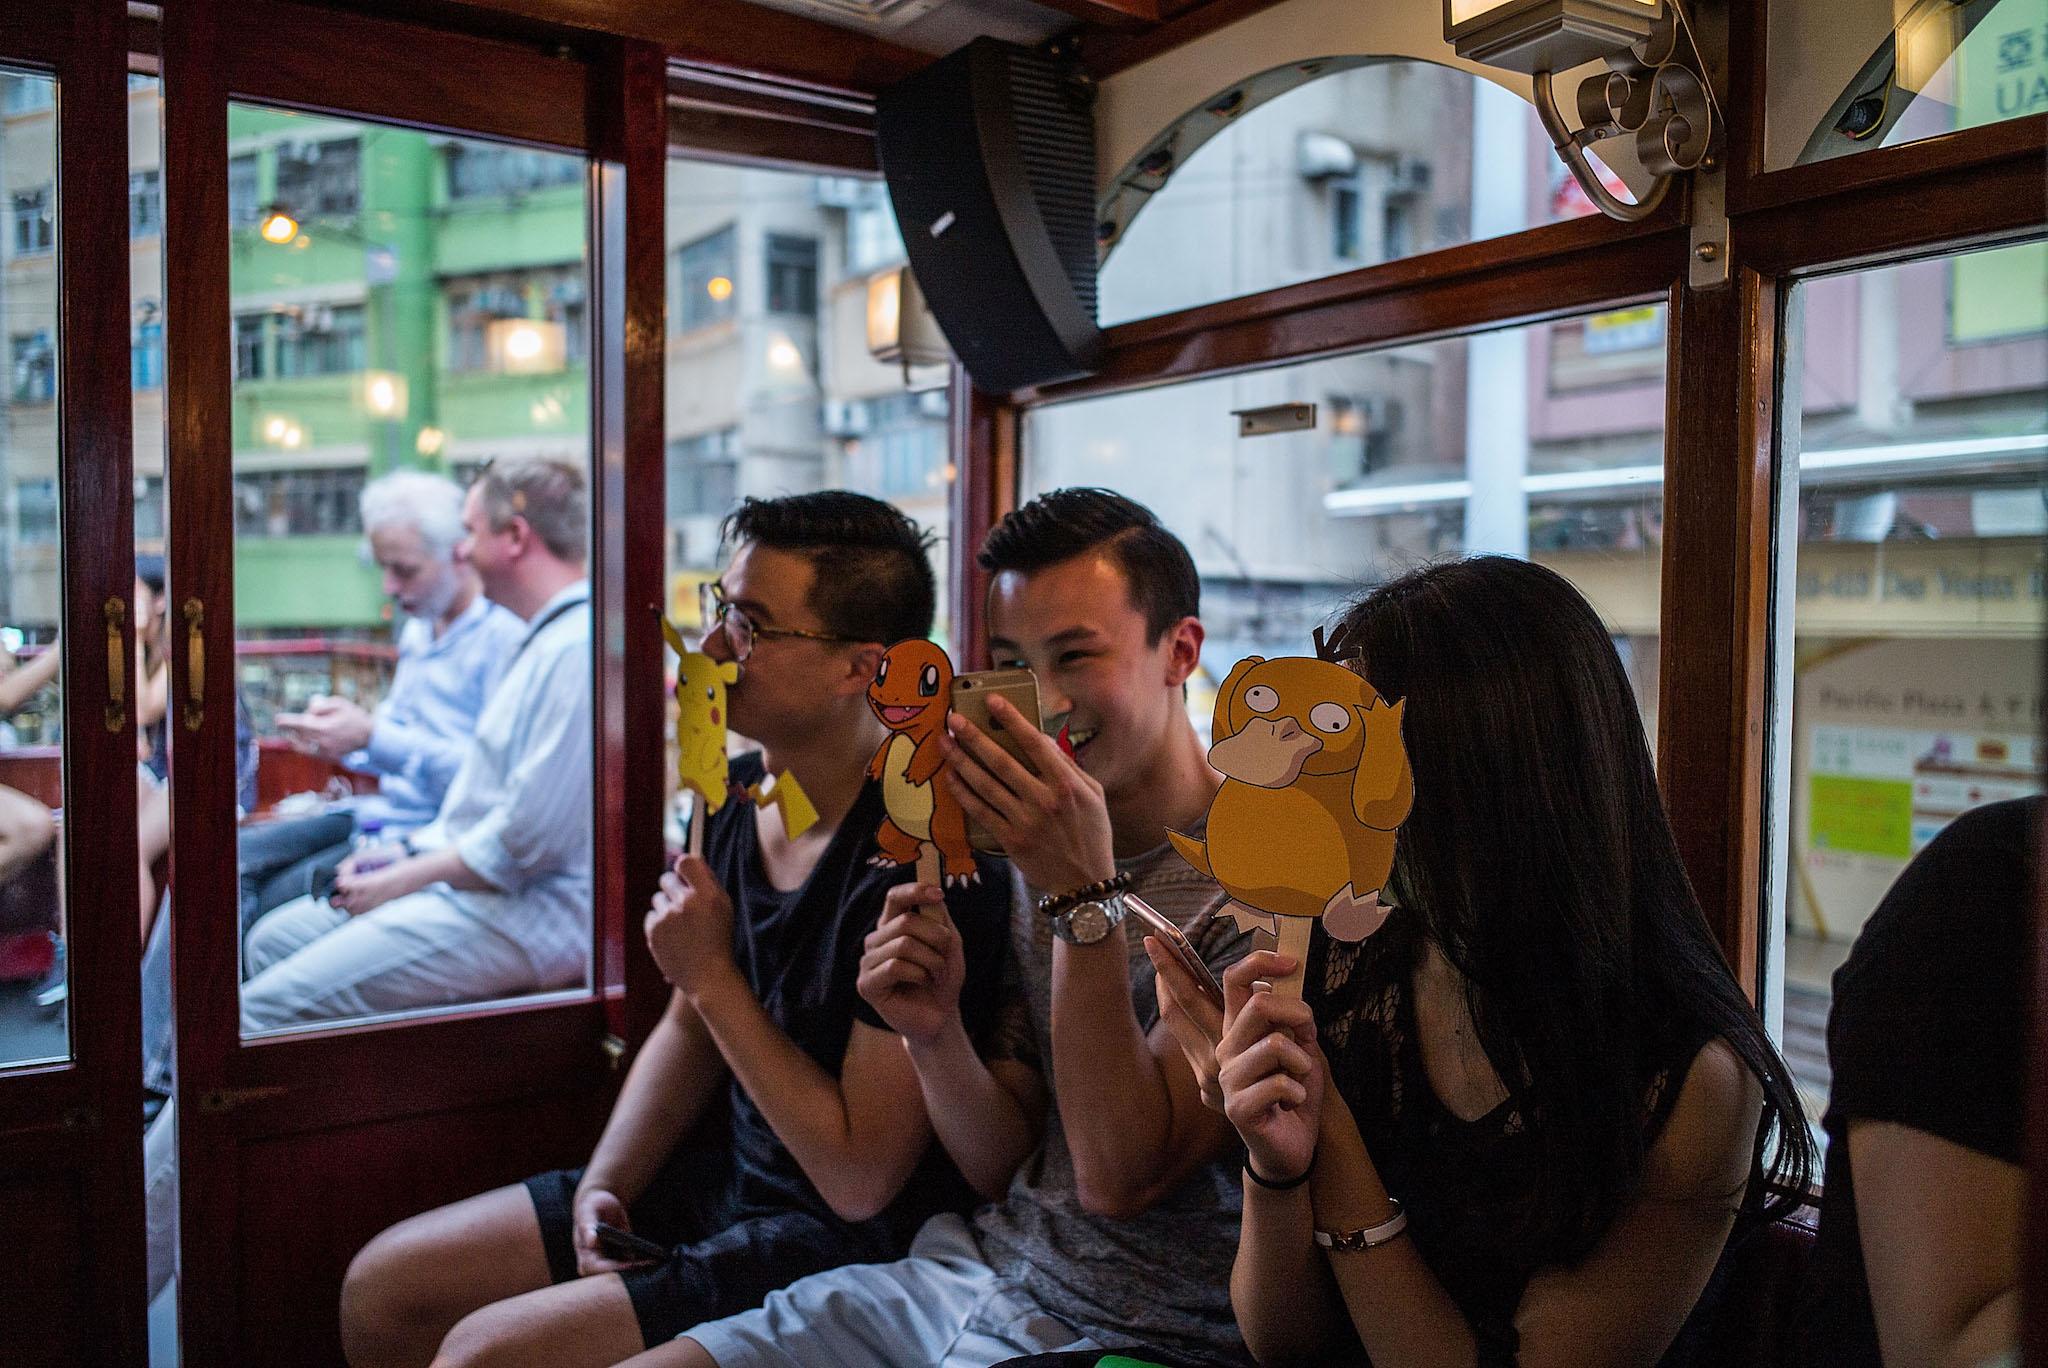 People join the Hong Kong's first Pokemon Go tram party organized by 'Sam the Local', on July 30, 2016 in Hong Kong